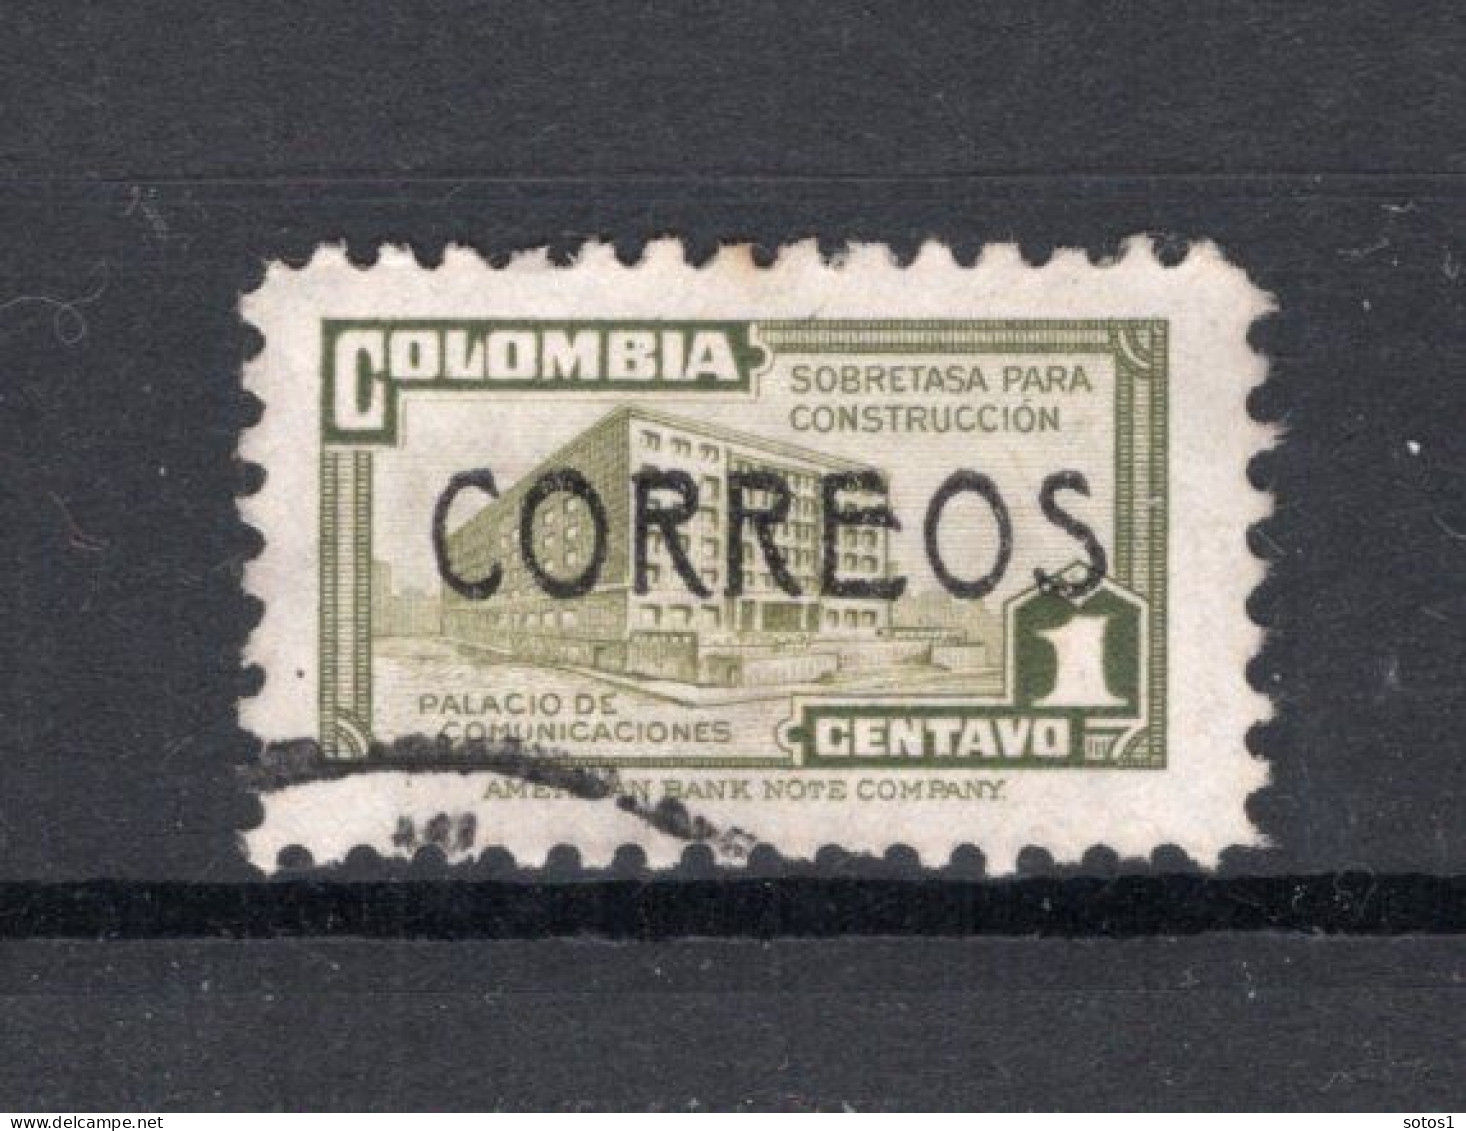 COLOMBIA Yt. 422° Gestempeld 1948 - Colombie